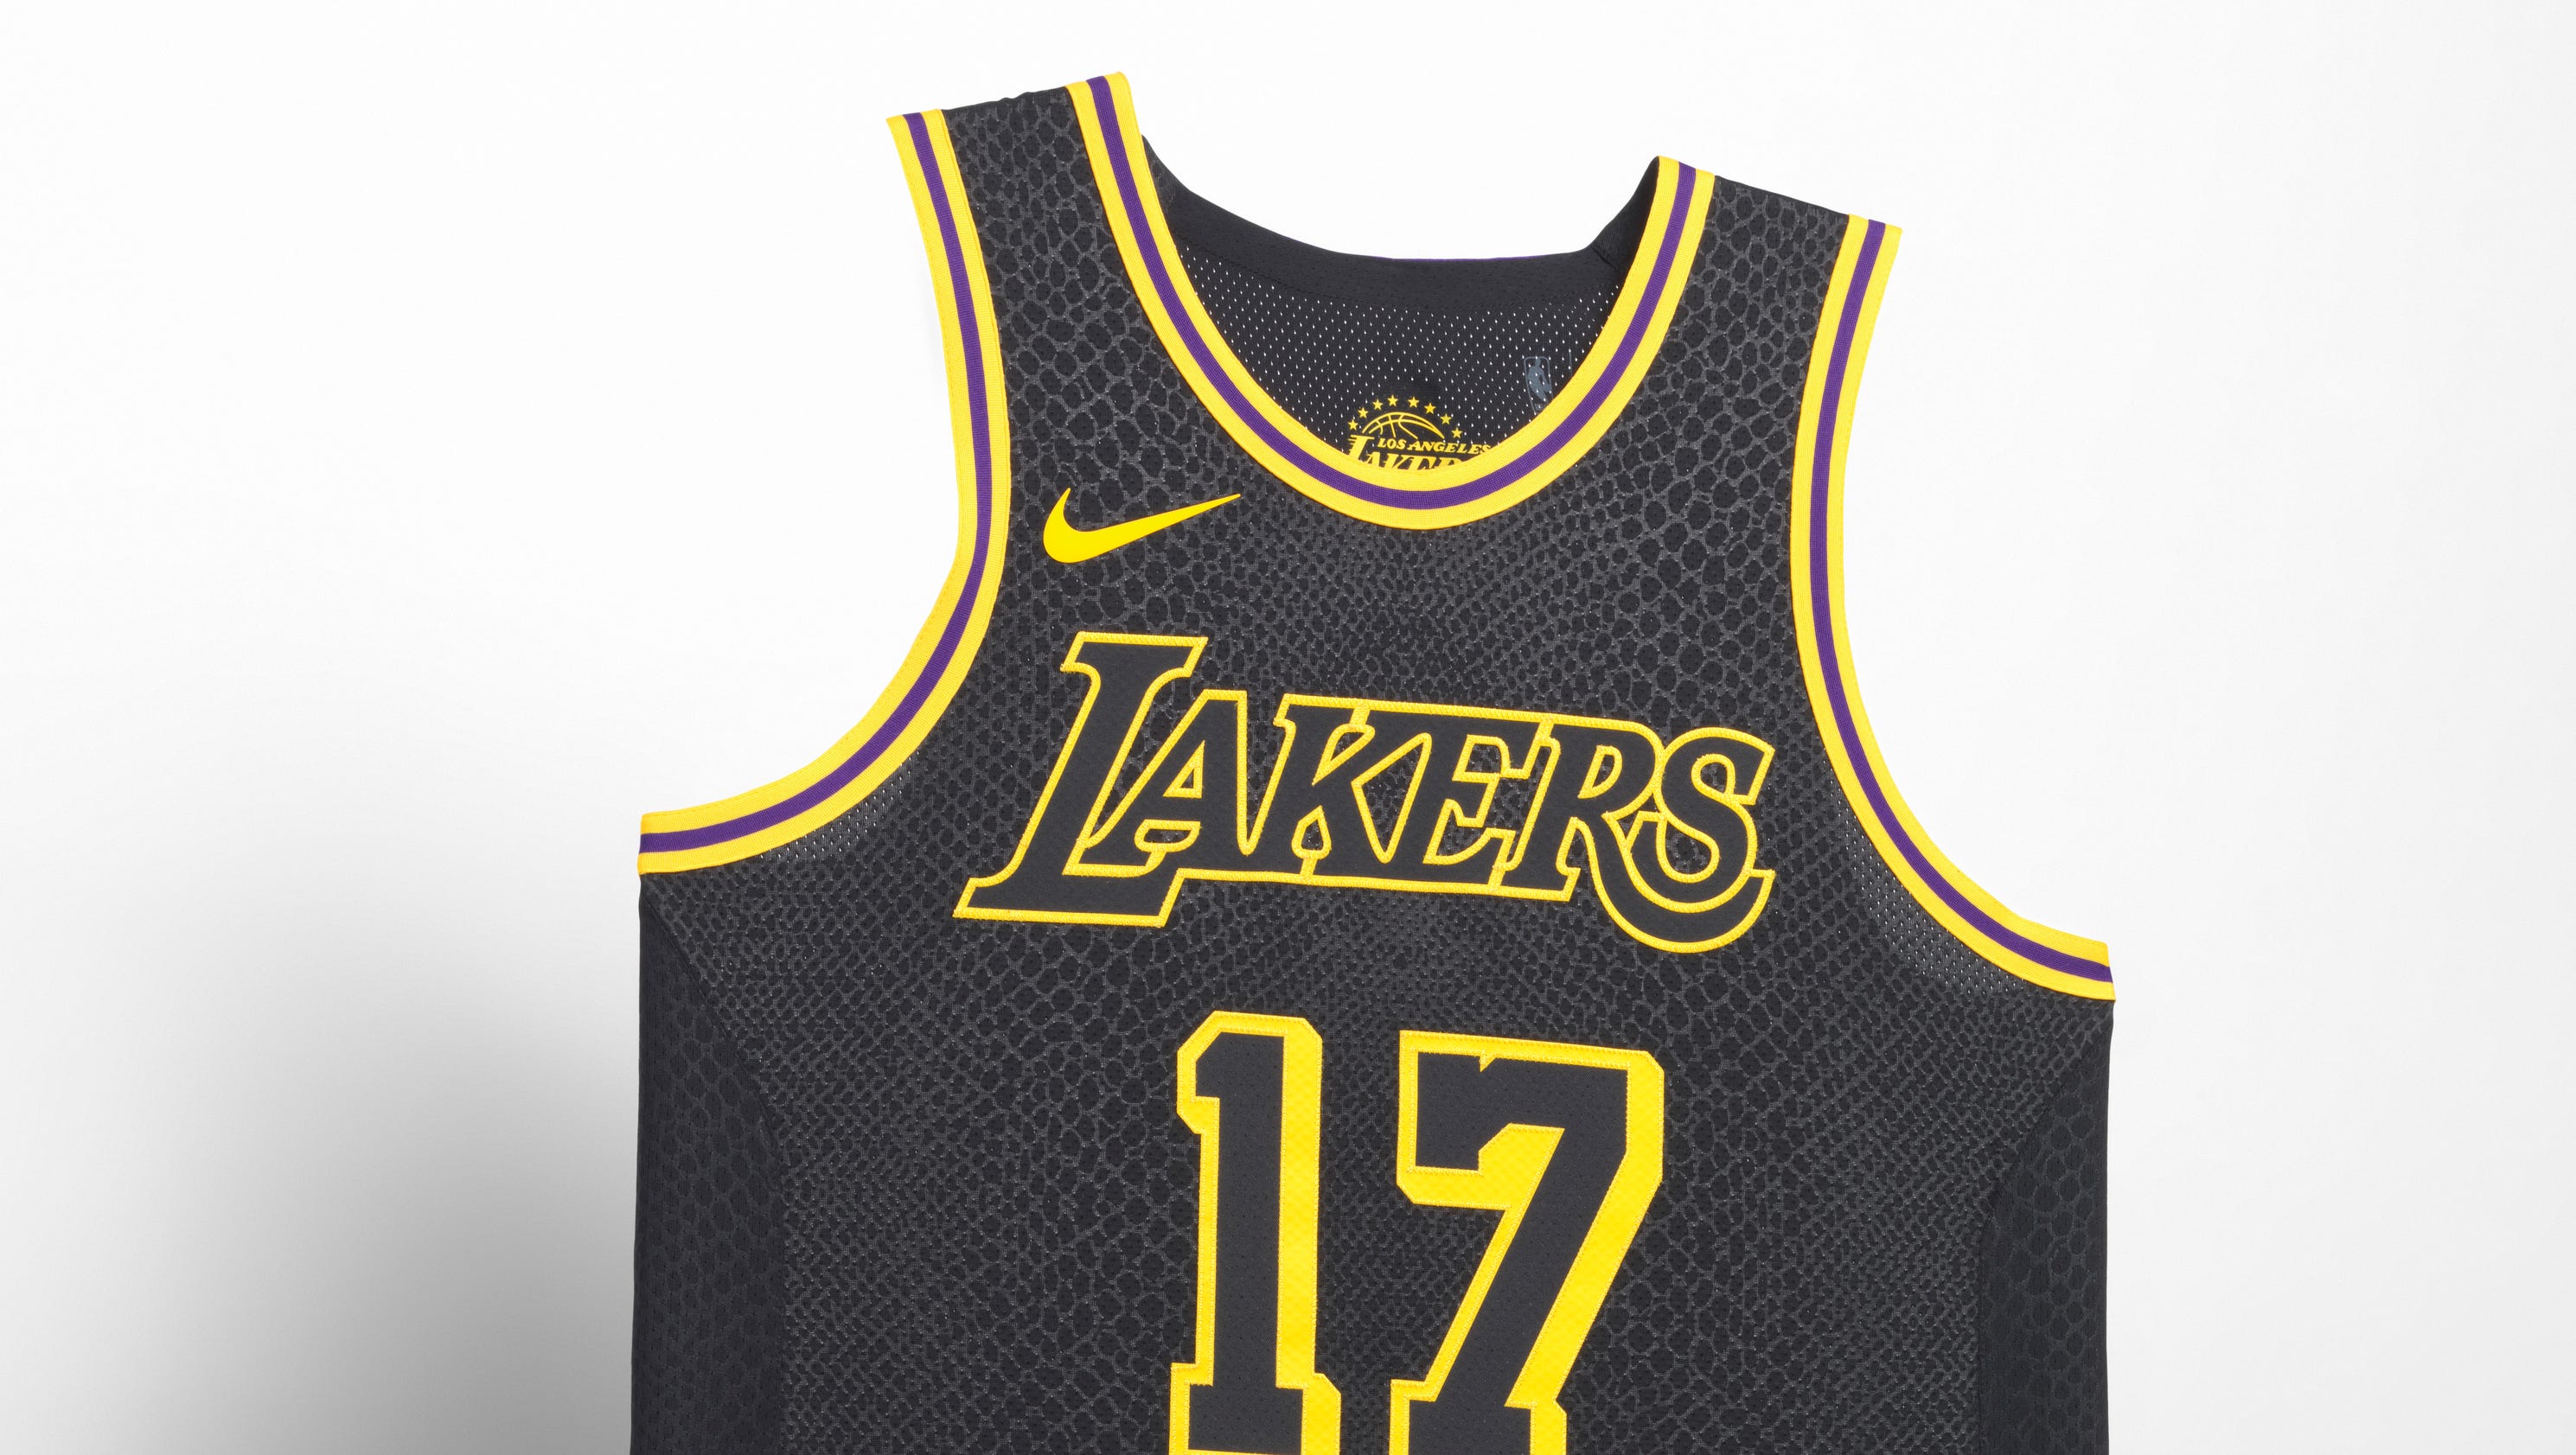 Nike NBA City Edition uniforms: The story behind the design process